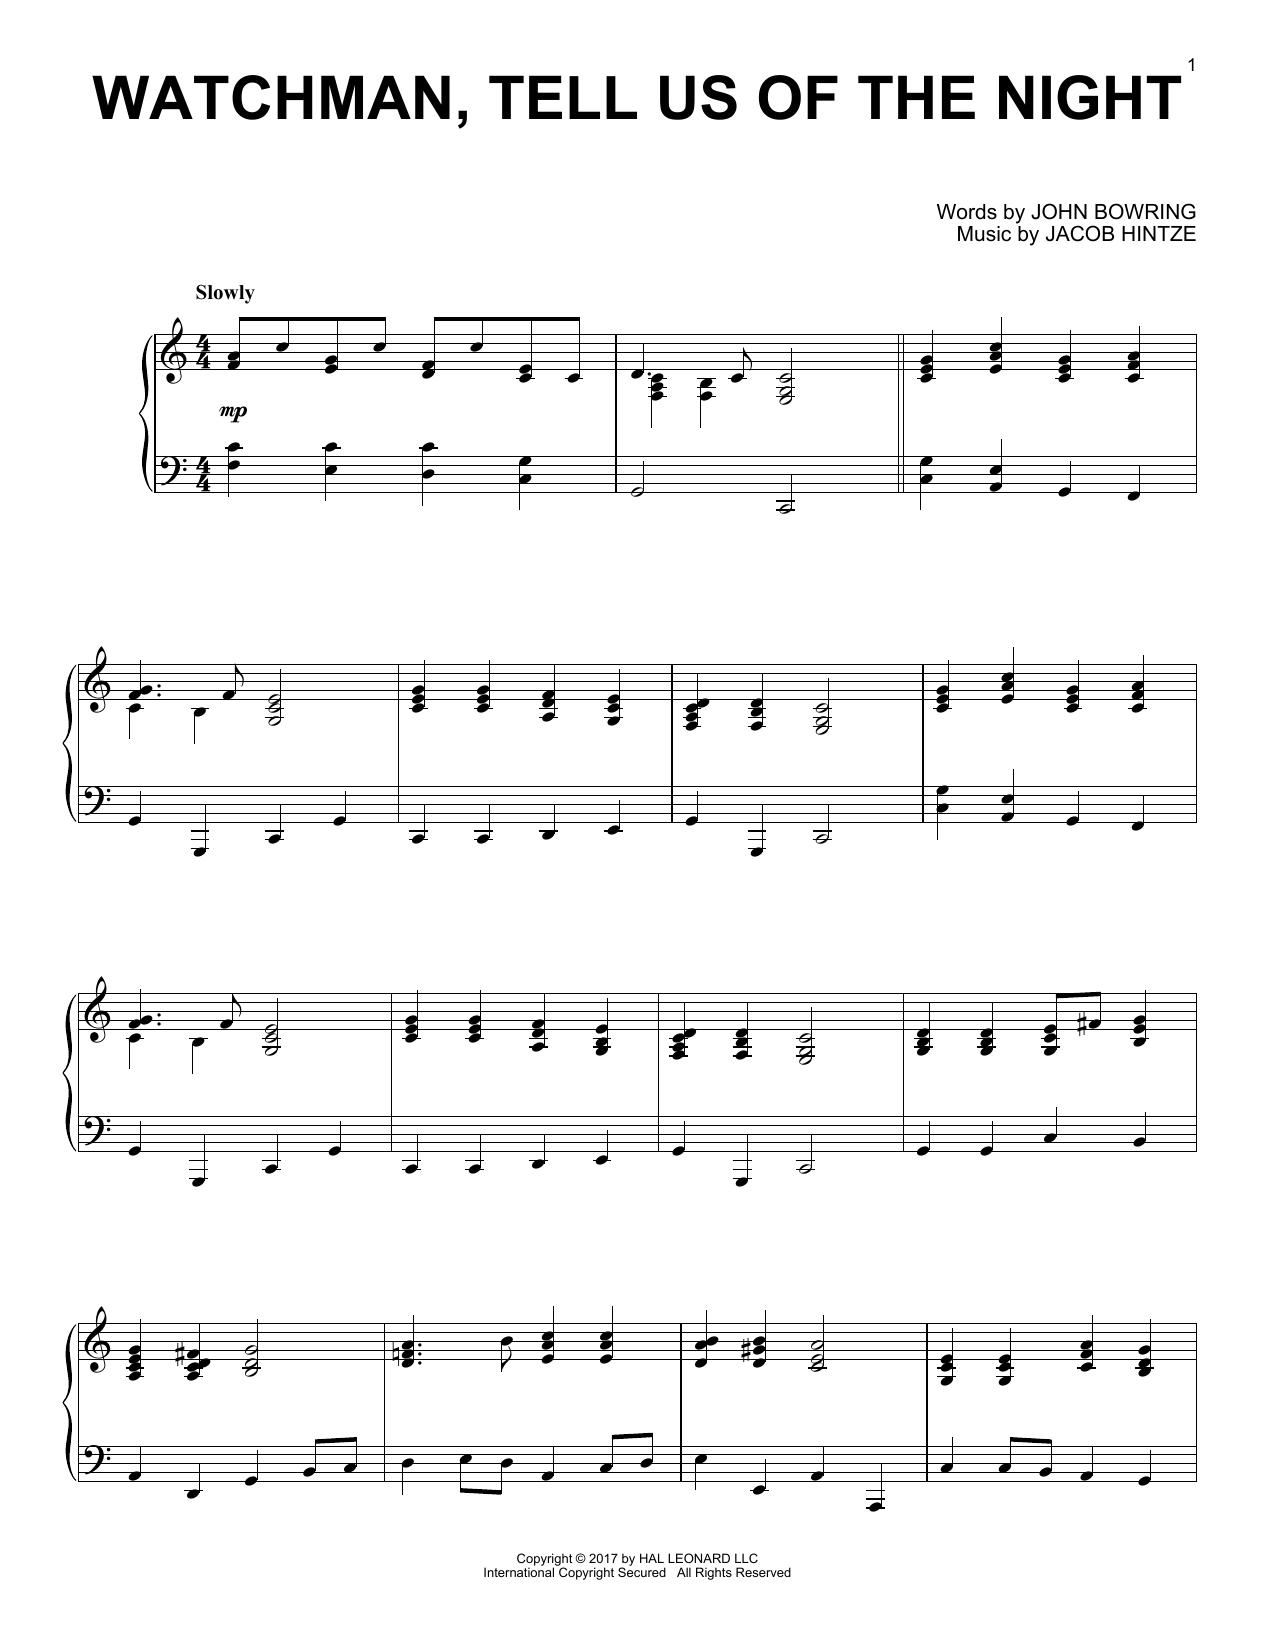 Download Jacob Hintze Watchman, Tell Us Of The Night Sheet Music